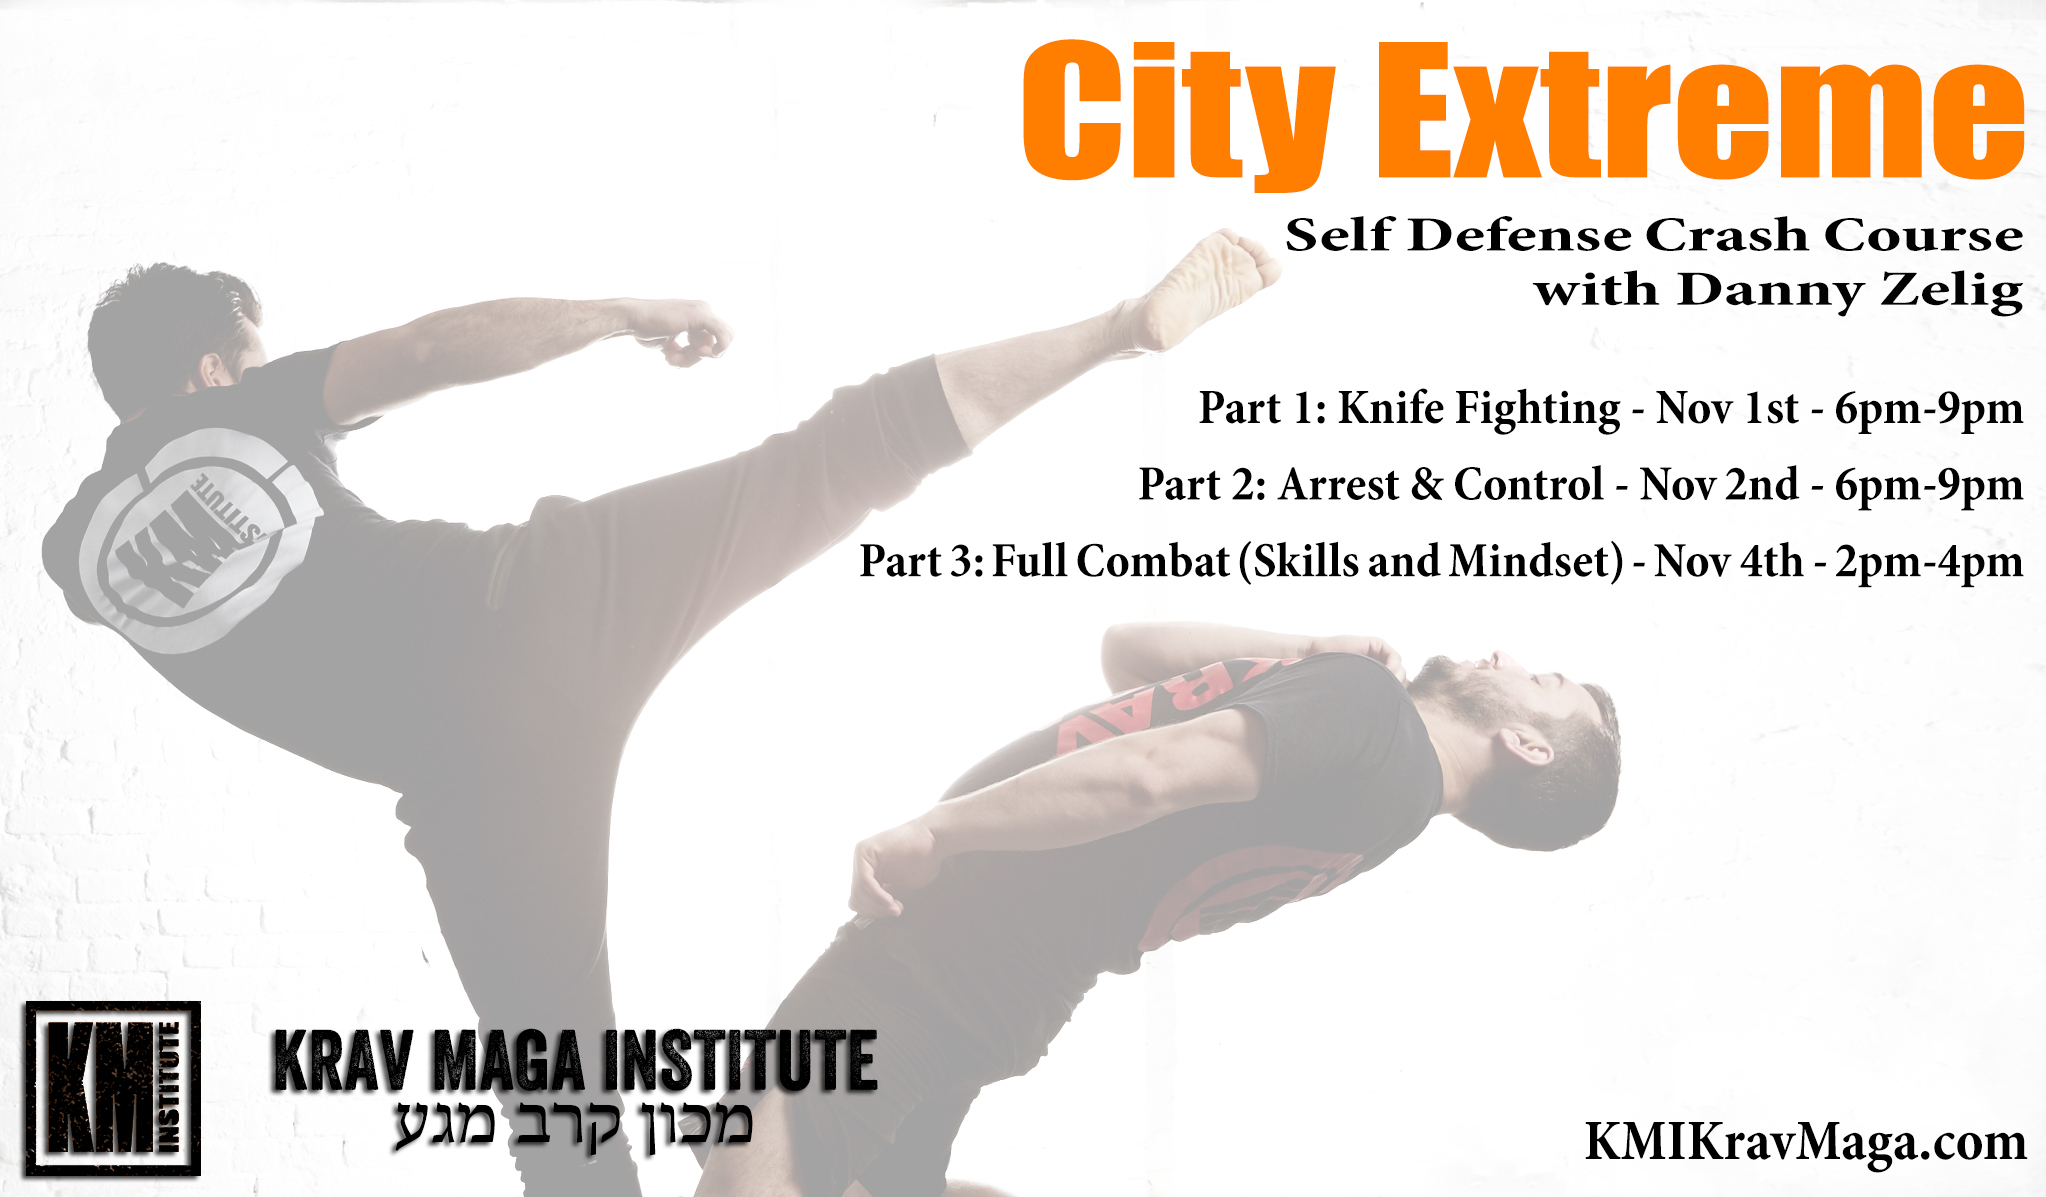 City Extreme Intensive Self Defense Course